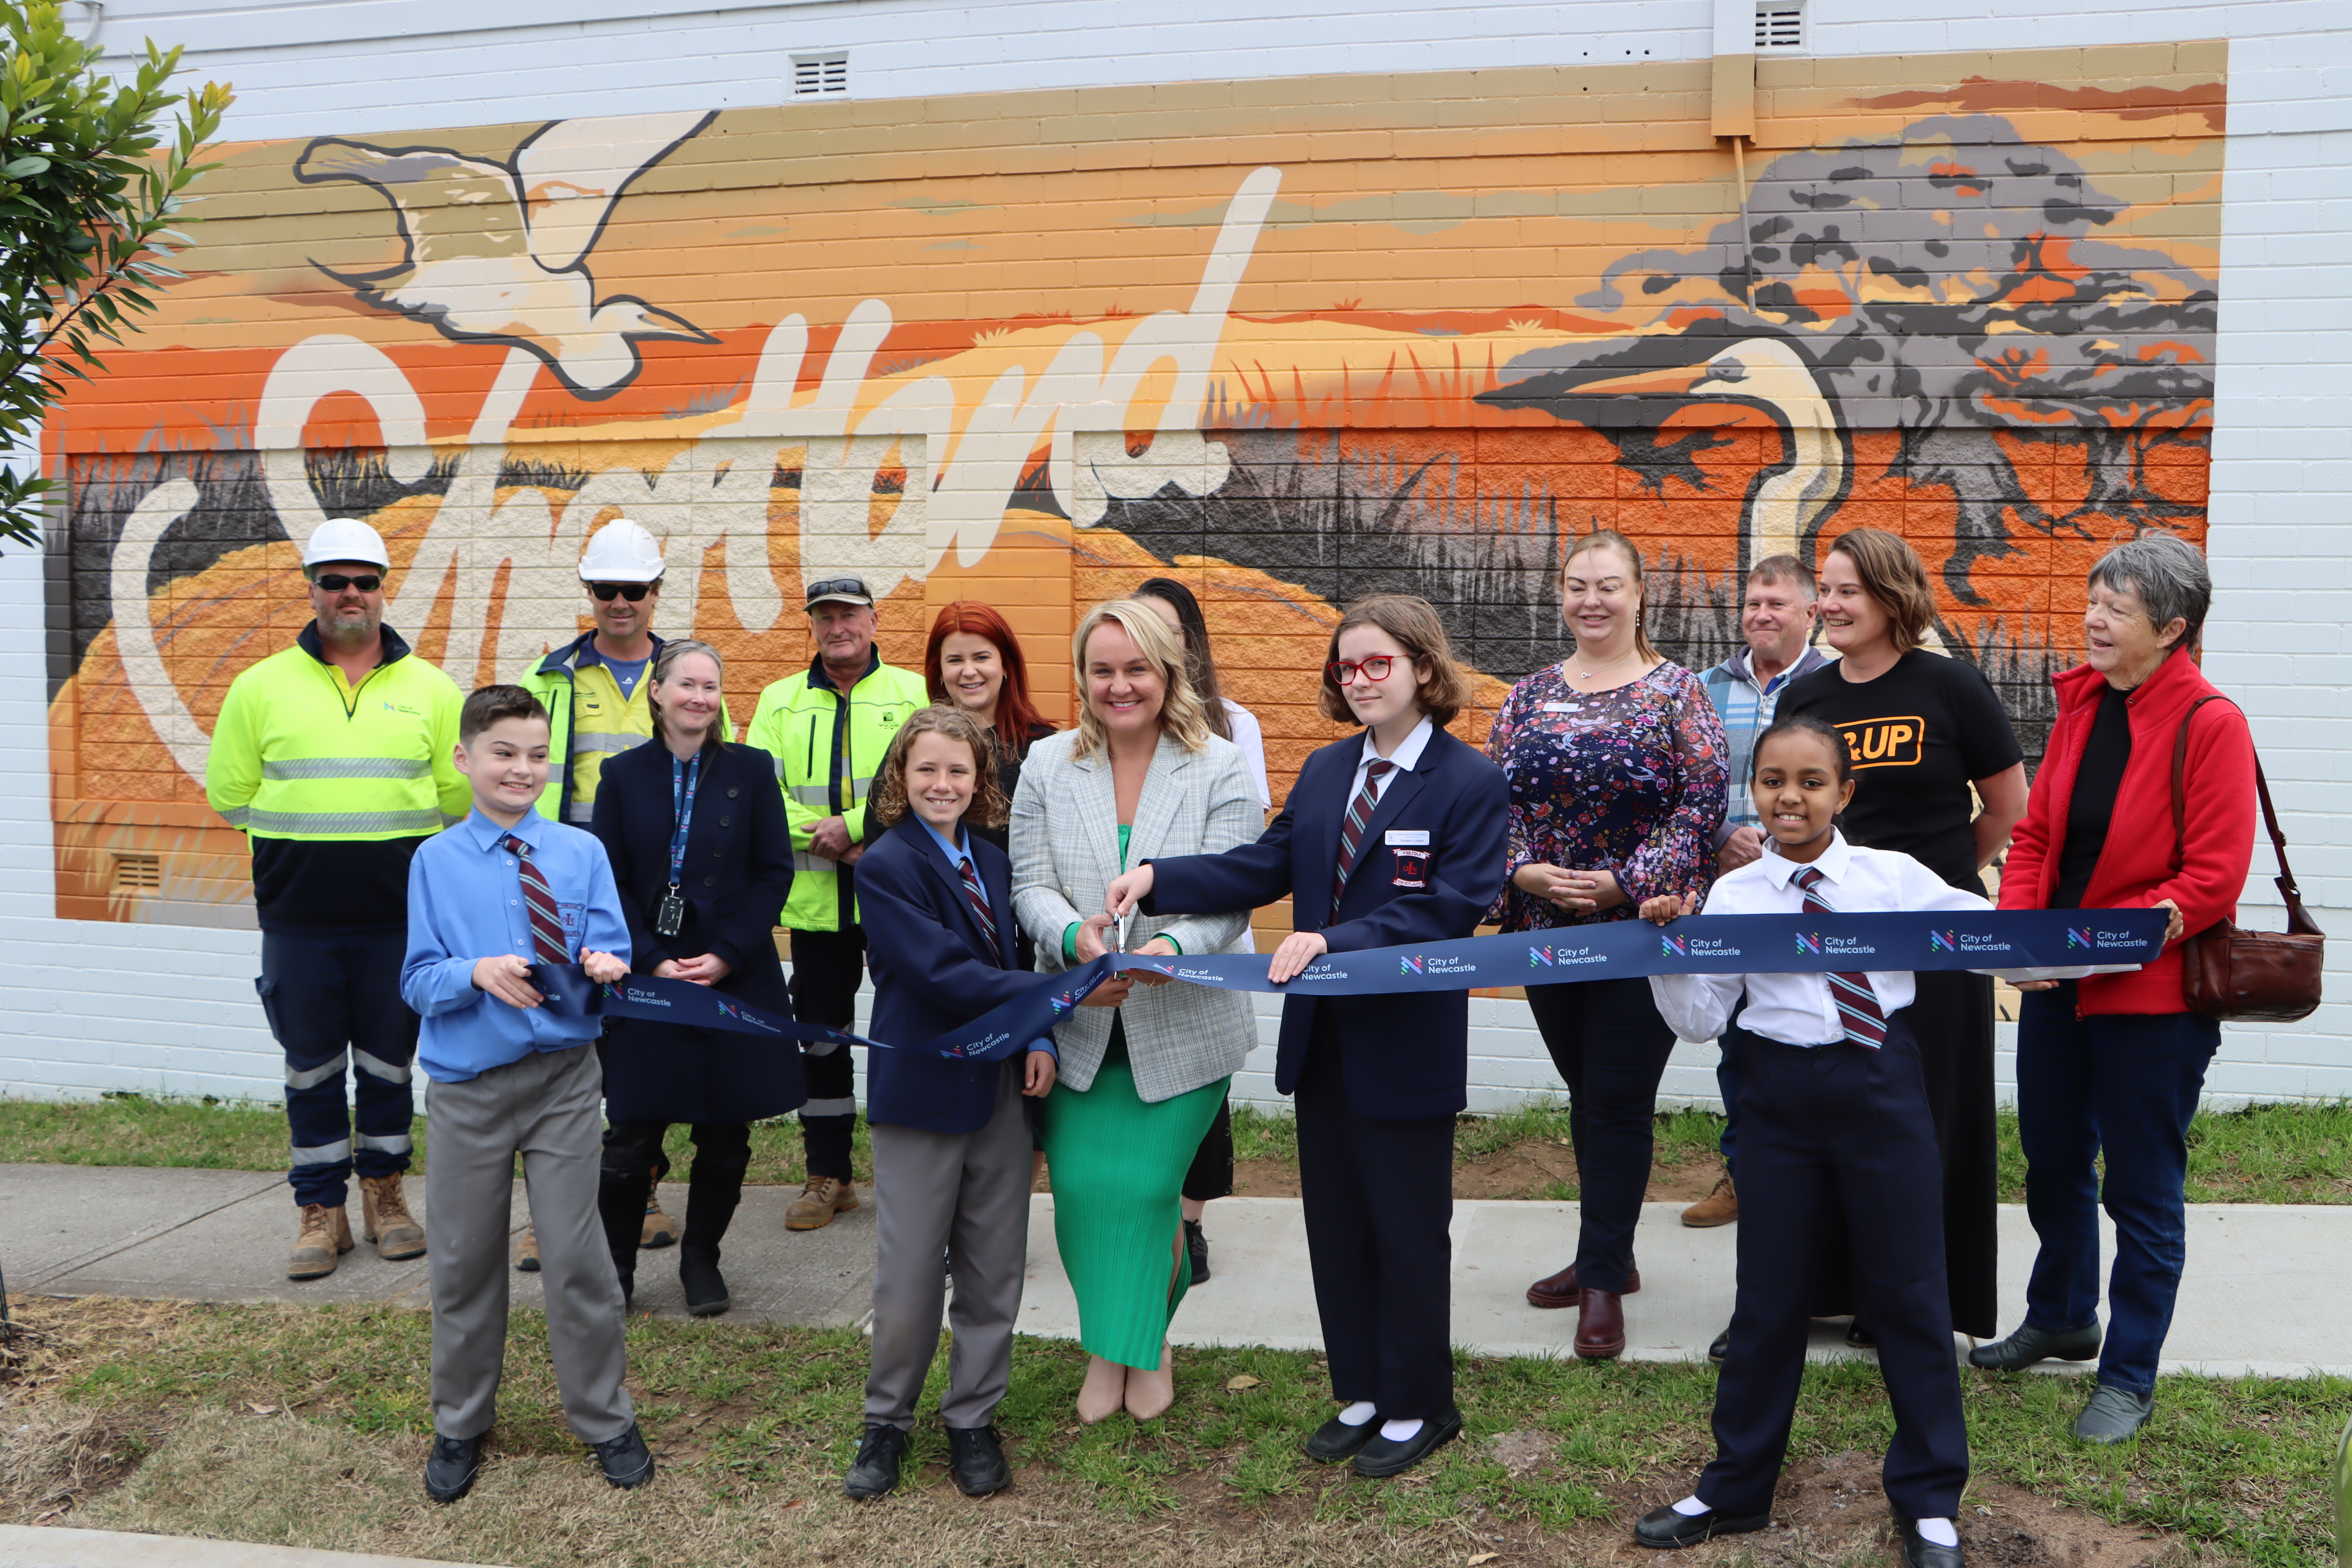 Lord-Mayor-Nuatali-Nelmes-officially-opening-the-Shortland-Local-Centre-following-upgrades-with-local-business-owners-residents-and-school-students.JPG